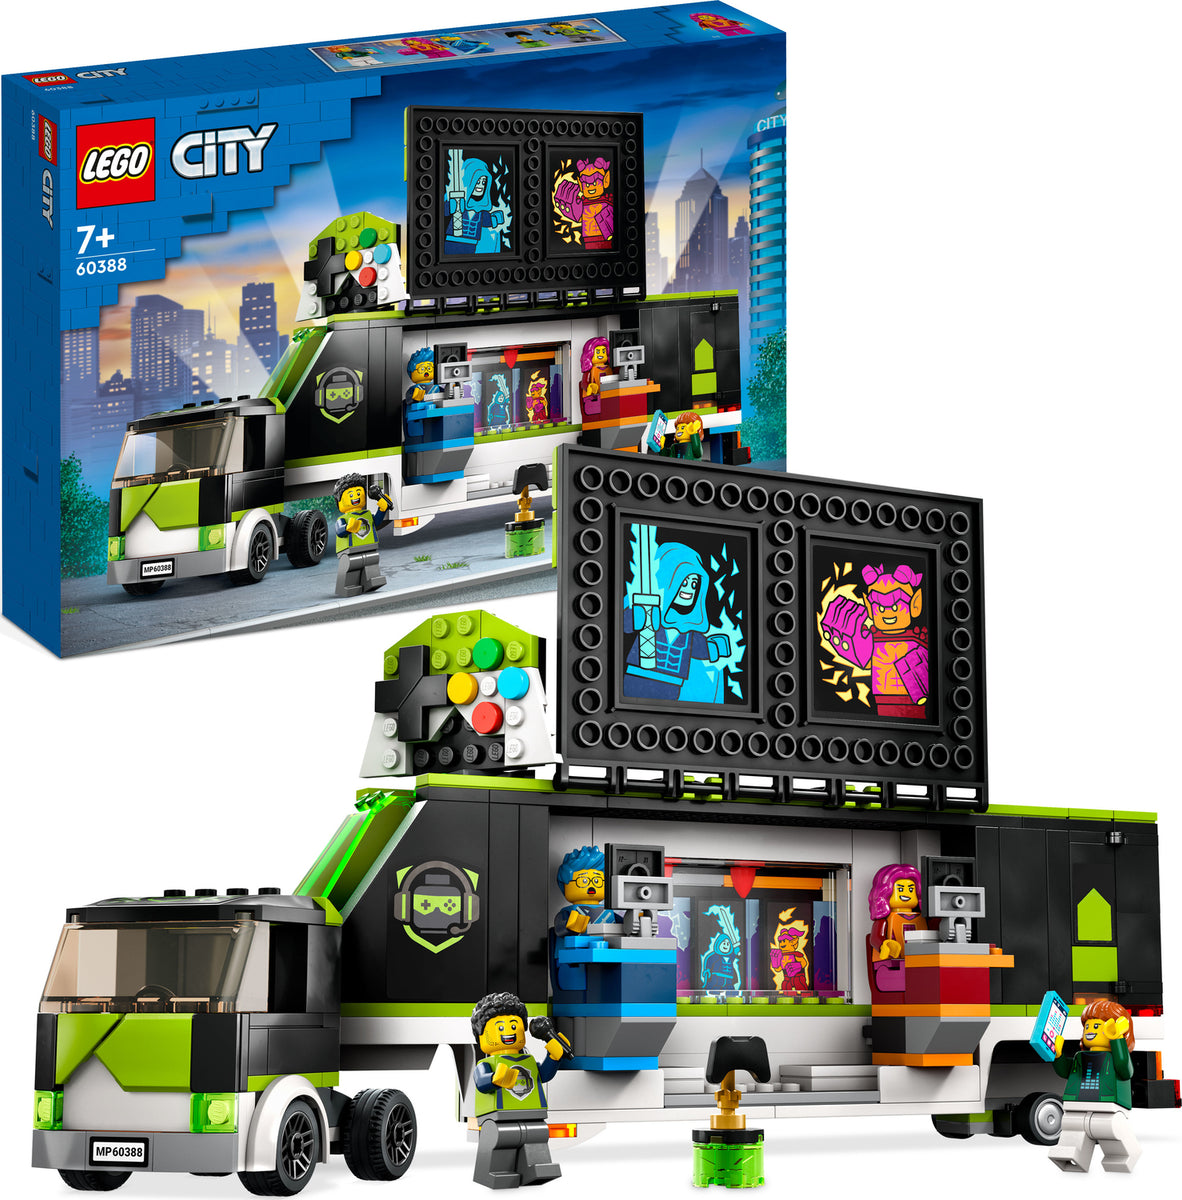 City Toys LEGO – Gaming Truck Tournament Turner 60388